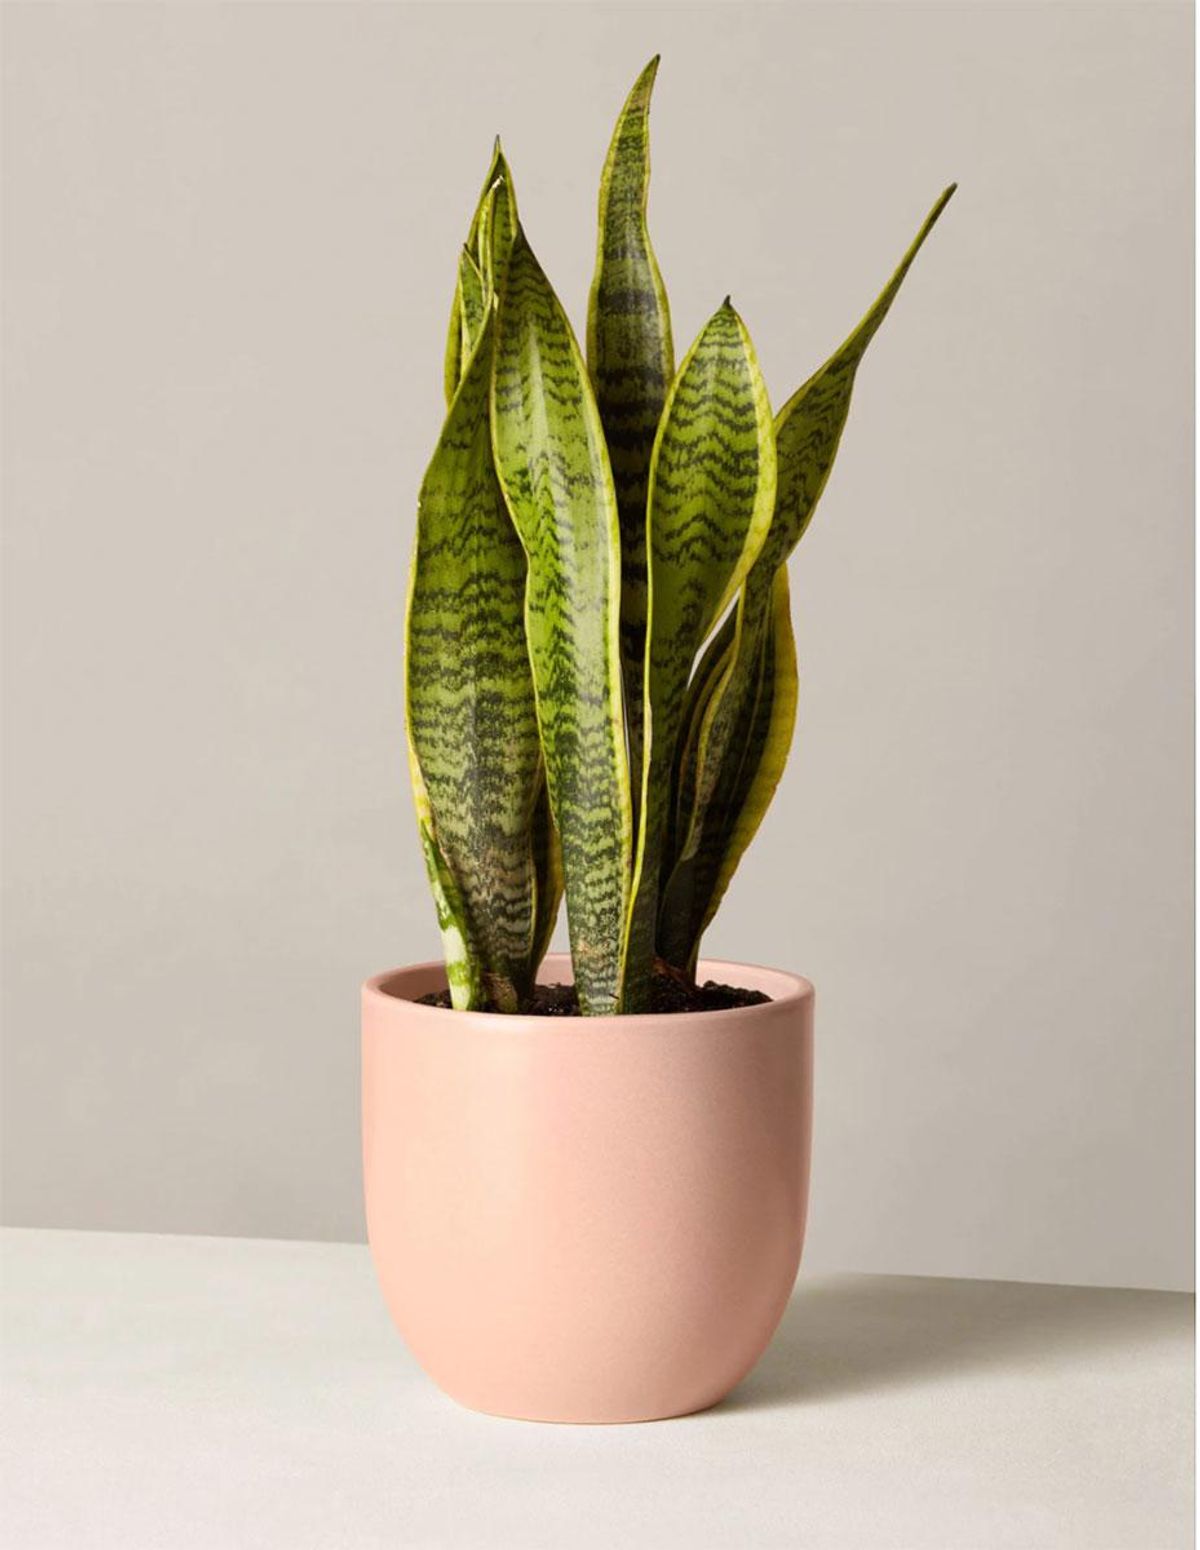 the sill snake plant laurentii